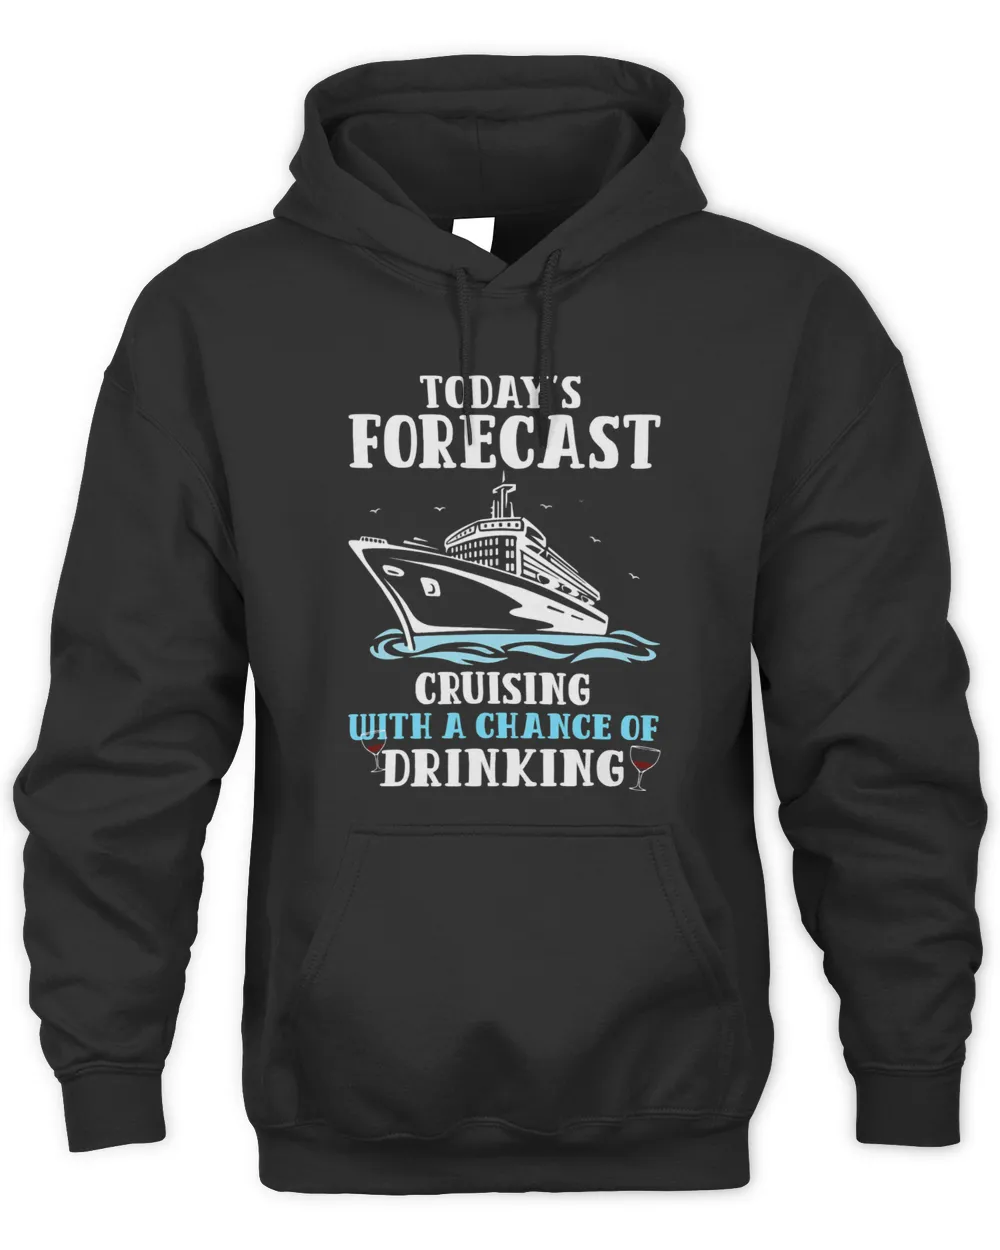 Todays forecast cruising with a chance of drinking